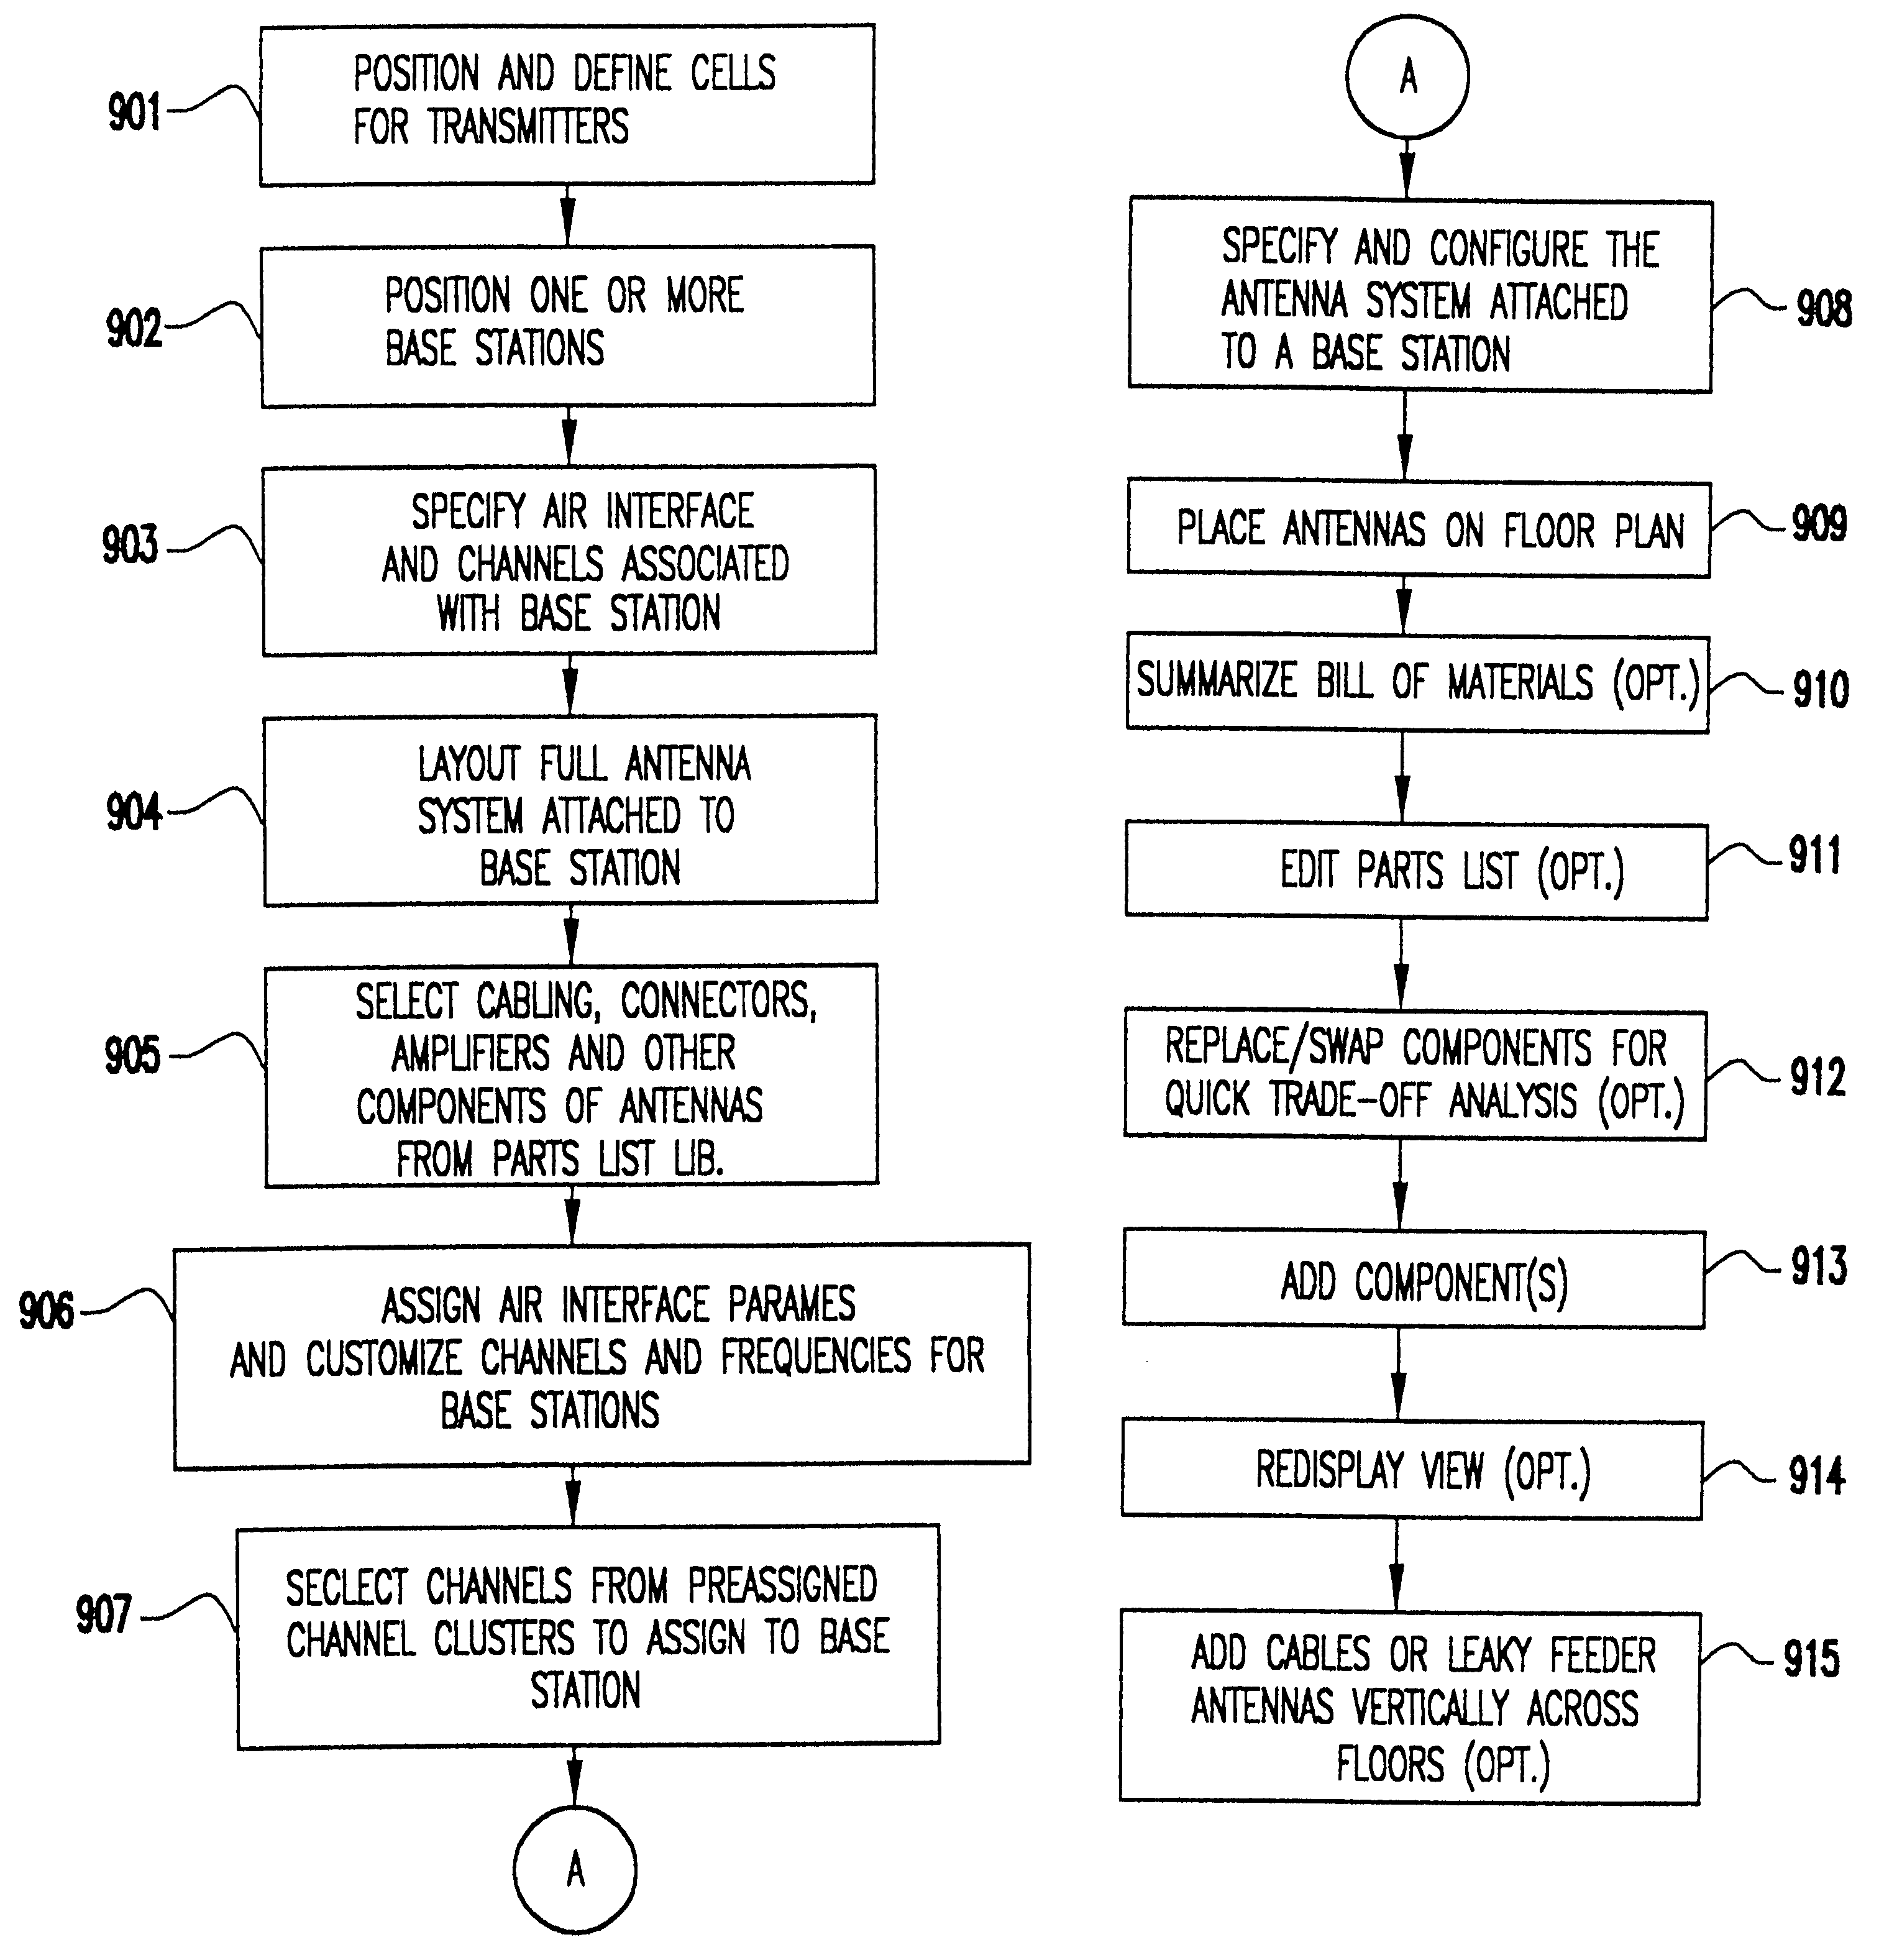 Method and system for automated optimization of antenna positioning in 3-D